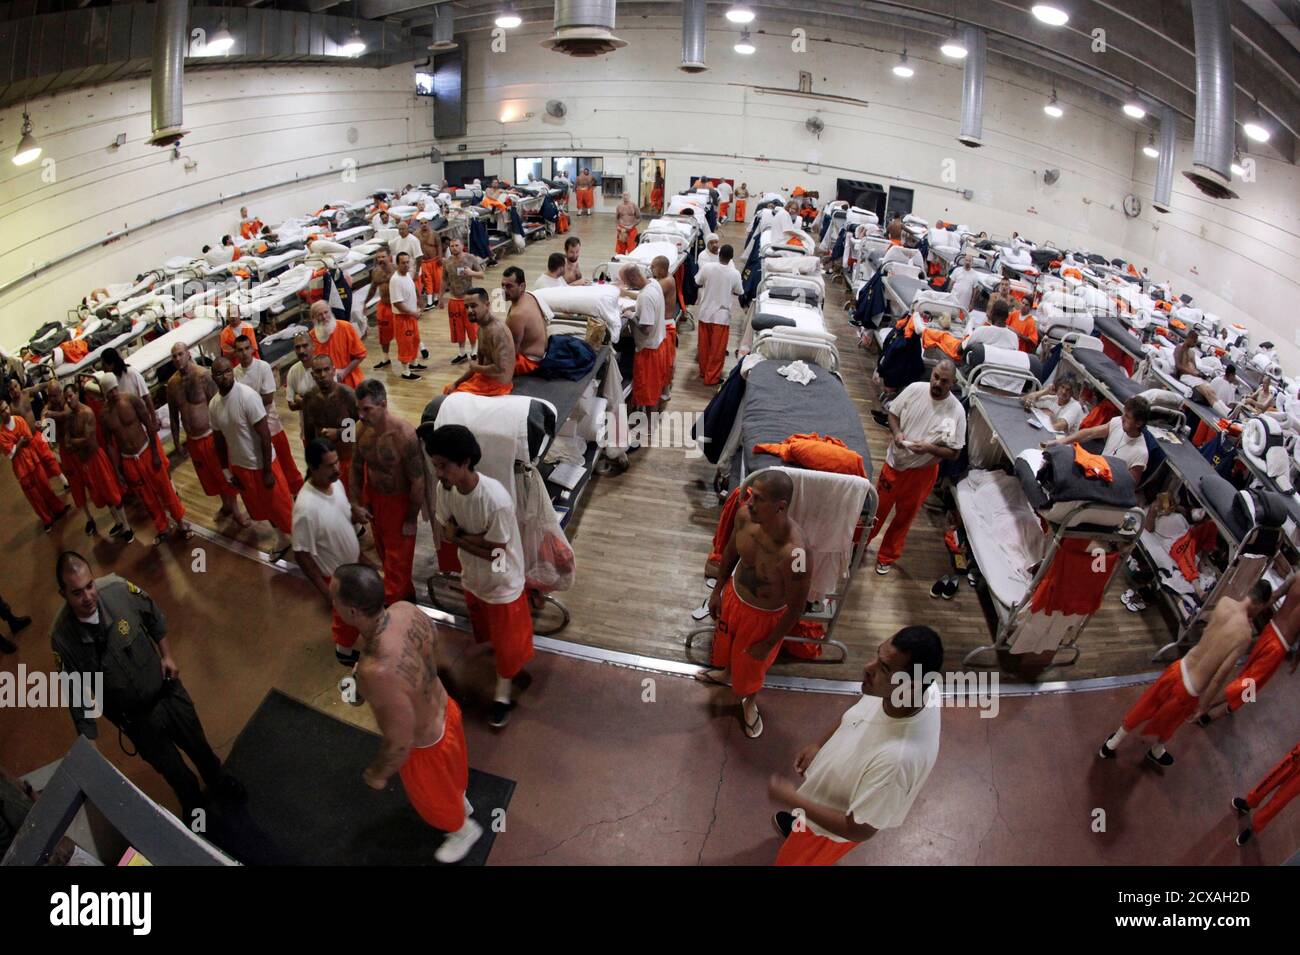 Inmates walk around a gymnasium where they are housed due to overcrowding at the California Institution for Men state prison in Chino, California, June 3, 2011. The Supreme Court has ordered California to release more than 30,000 inmates over the next two years or take other steps to ease overcrowding in its prisons to prevent "needless suffering and death." California's 33 adult prisons were designed to hold about 80,000 inmates and now have about 145,000. The U.S. has more than 2 million people in state and local prisons. It has long had the highest incarceration rate in the world. REUTERS/L Stock Photo